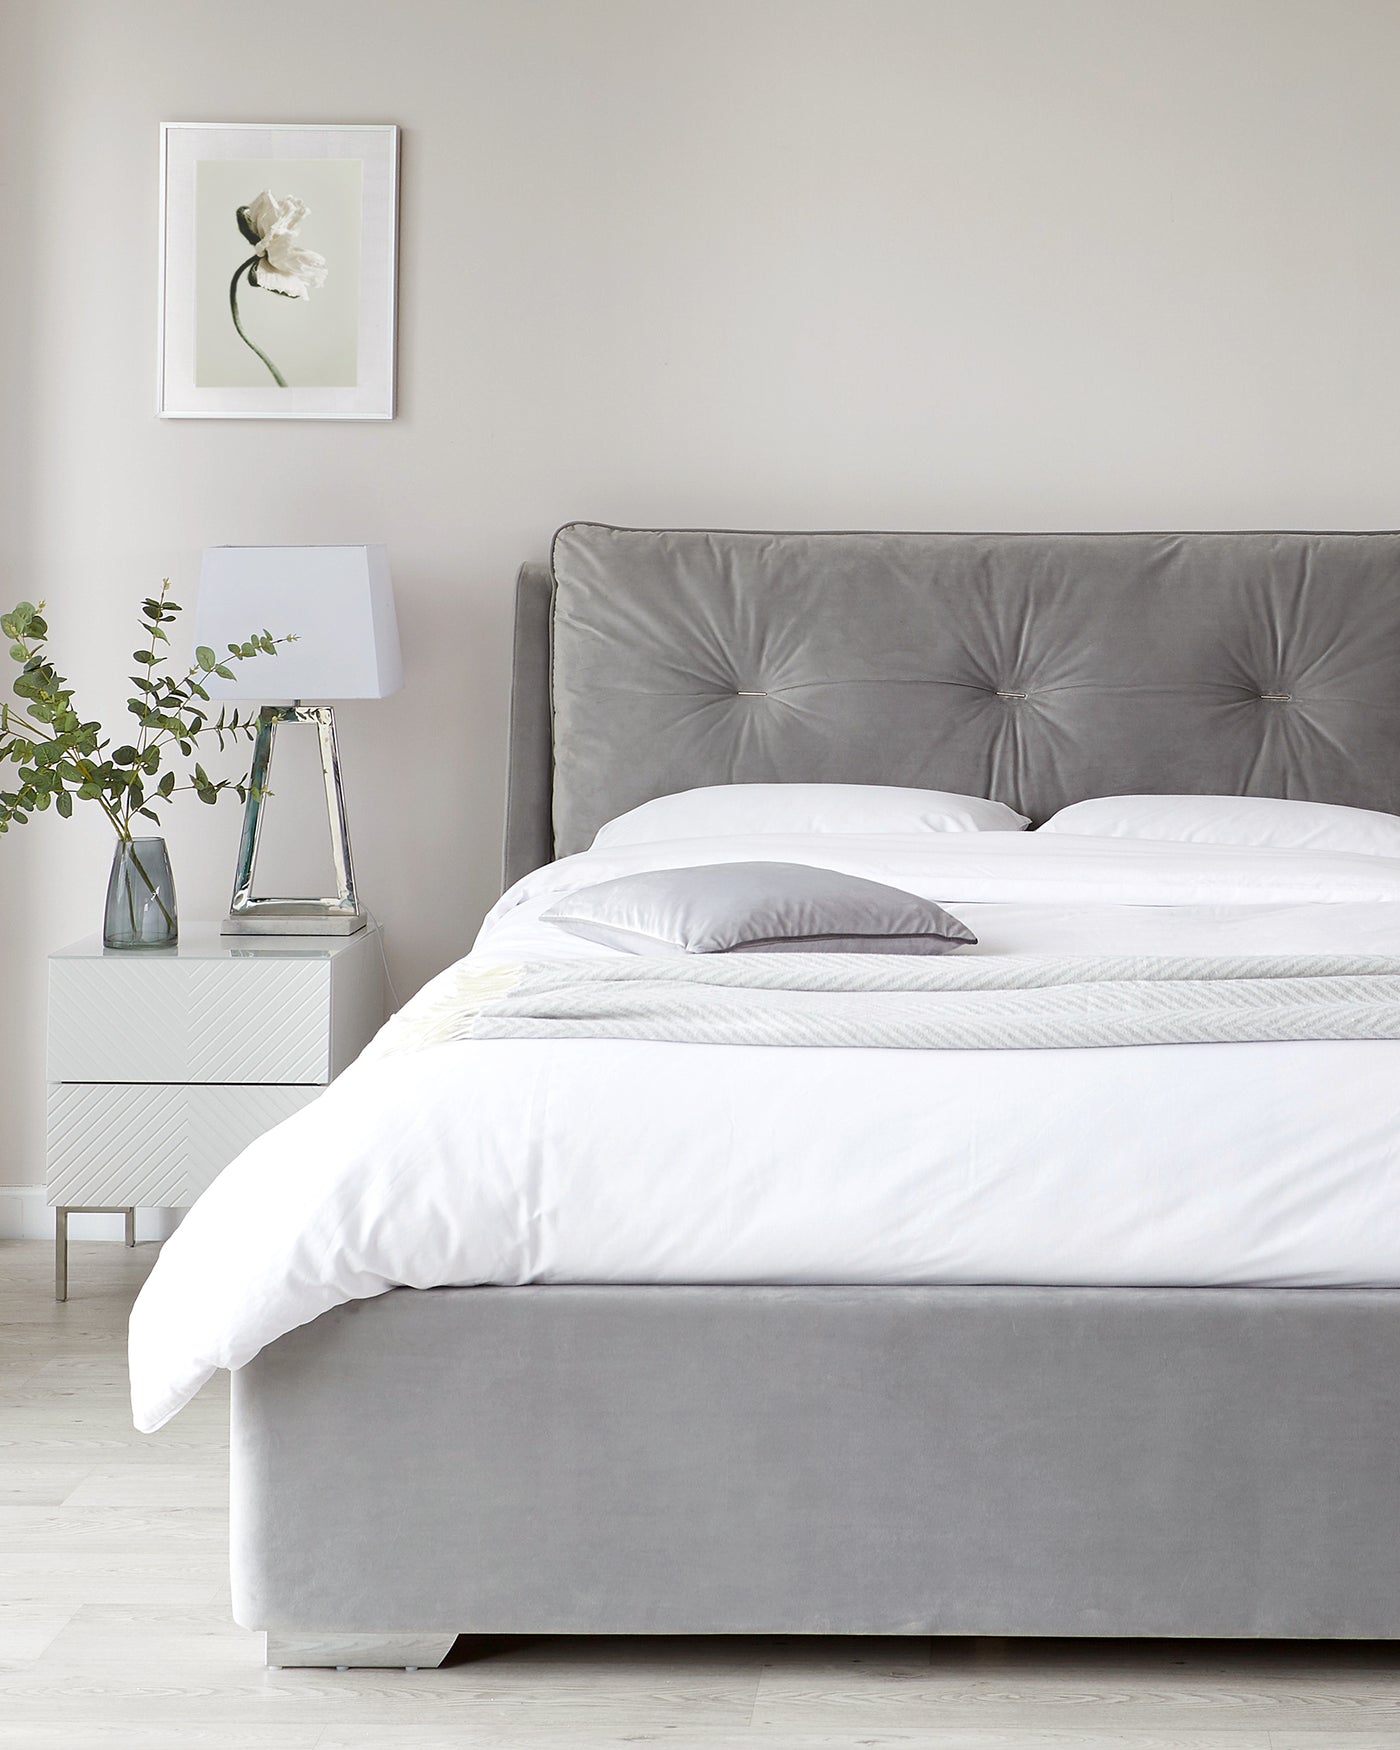 Elegant grey upholstered bed with a tall, tufted headboard and a clean-lined white nightstand with a chevron pattern. The bed is adorned with crisp white bed linens and fluffy pillows, and the nightstand features a contemporary white lamp with a clear base.